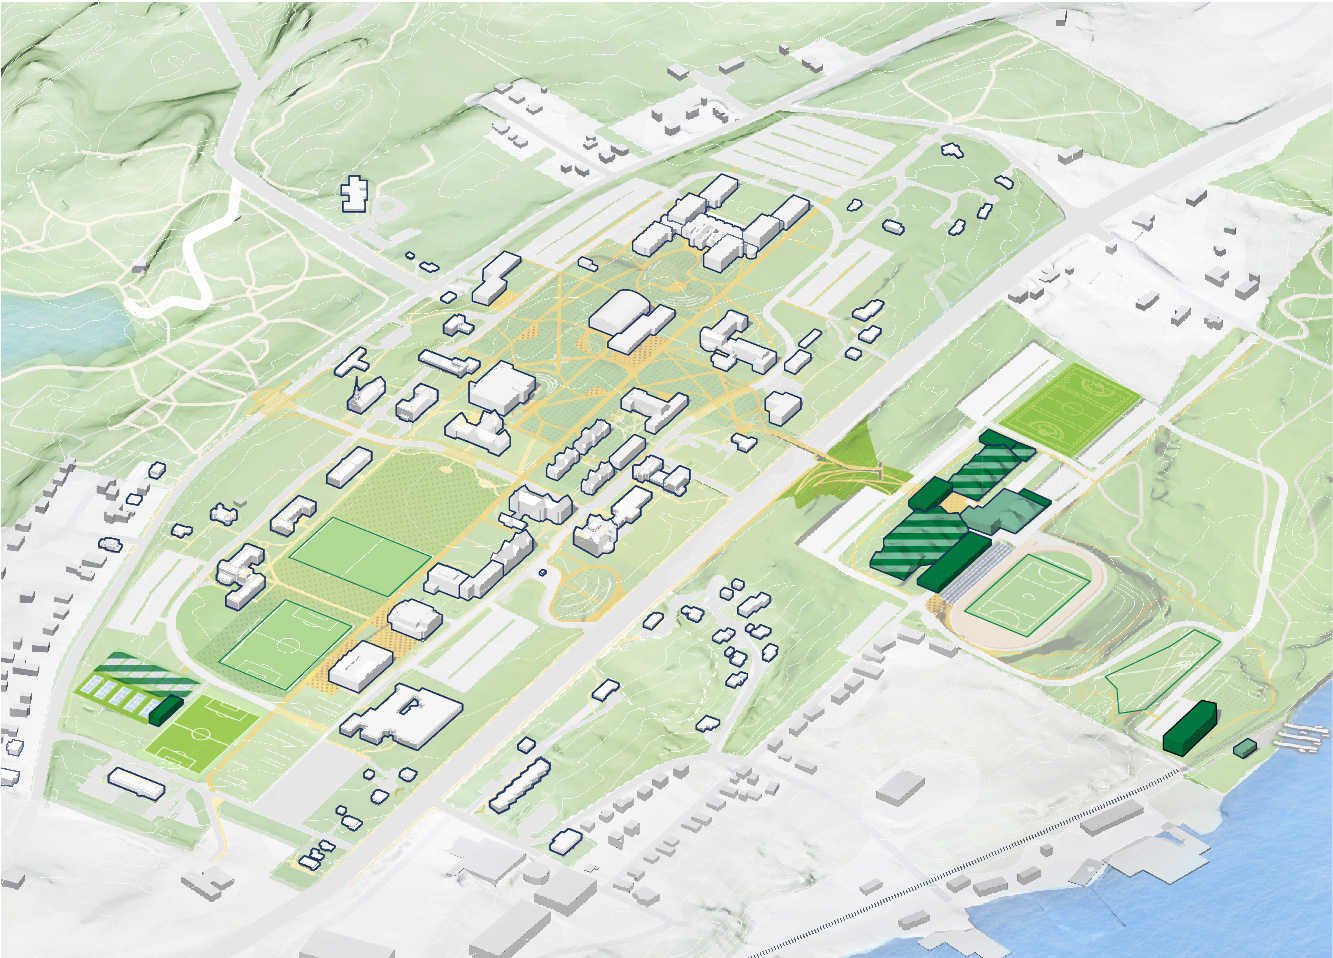 A concept rendering showing the proposed improvements to campus that support athletic life.